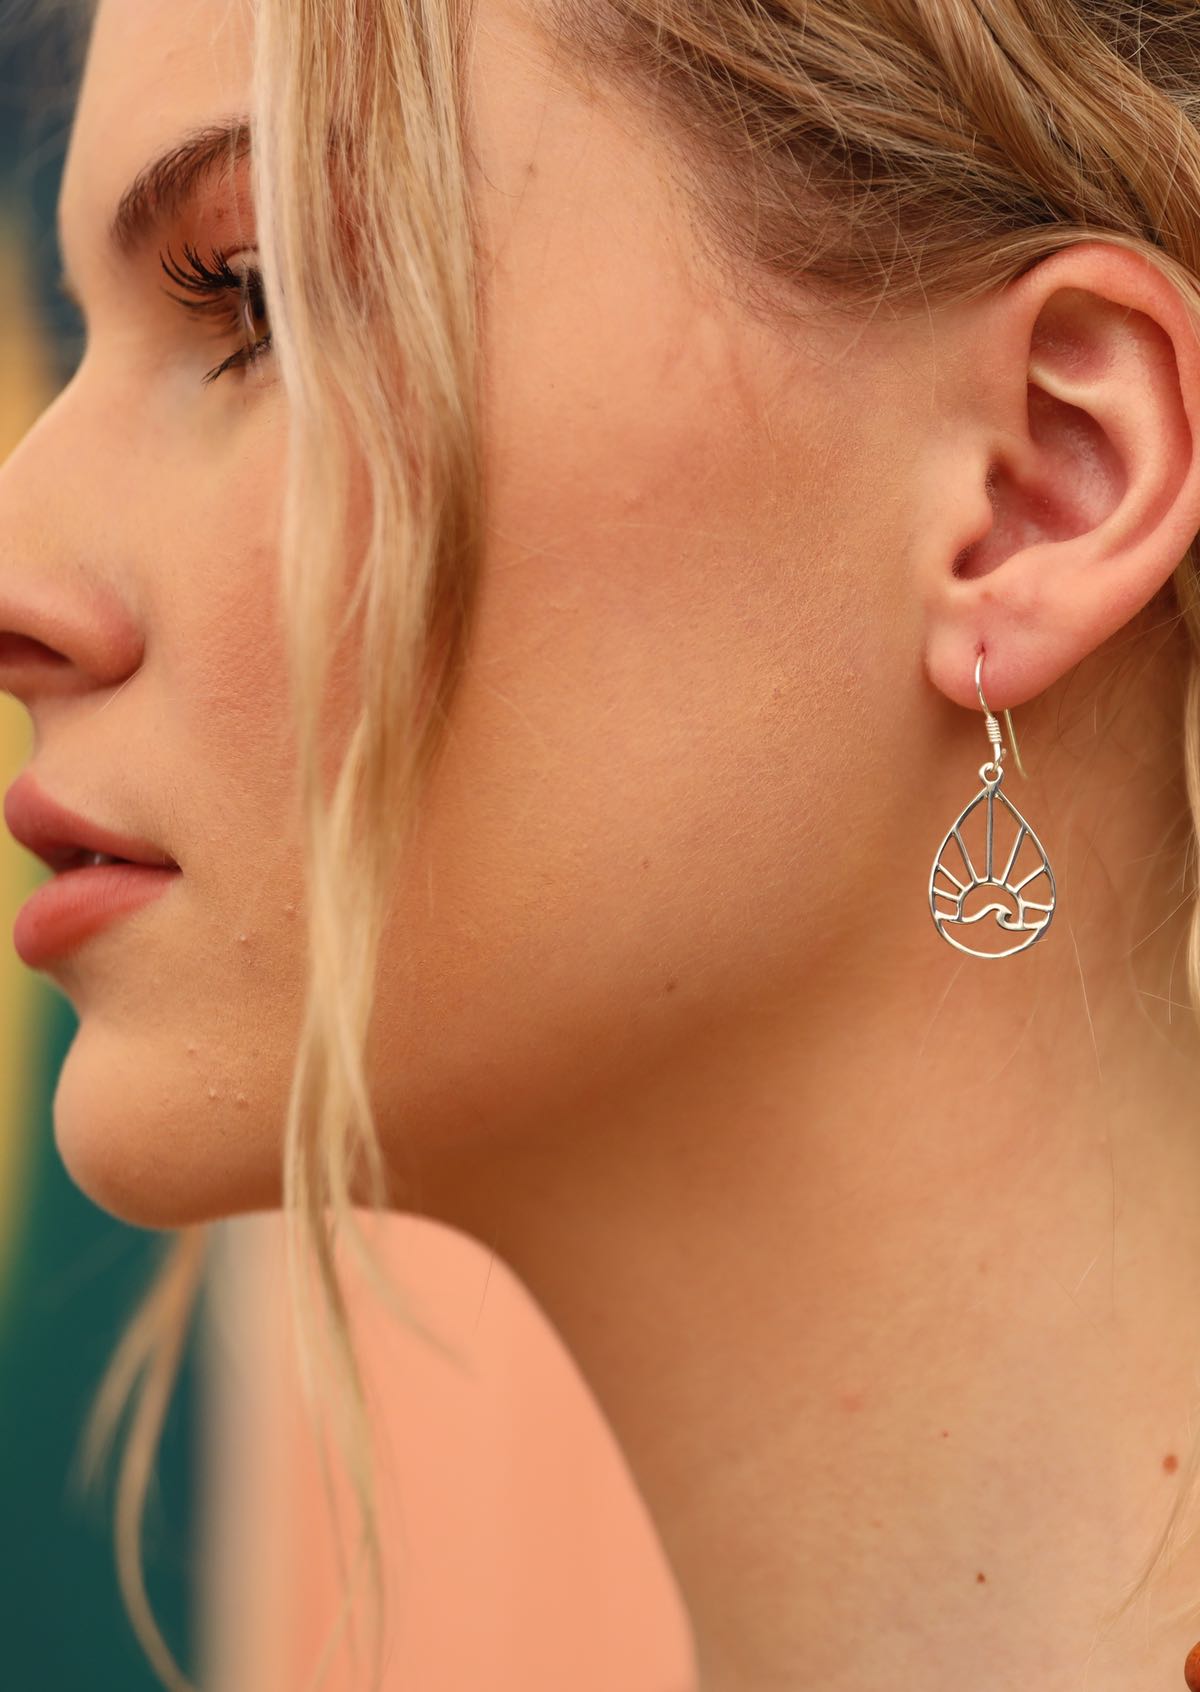 Blonde woman wearing silver earrings that are teardrop shape with a sun and wave within it